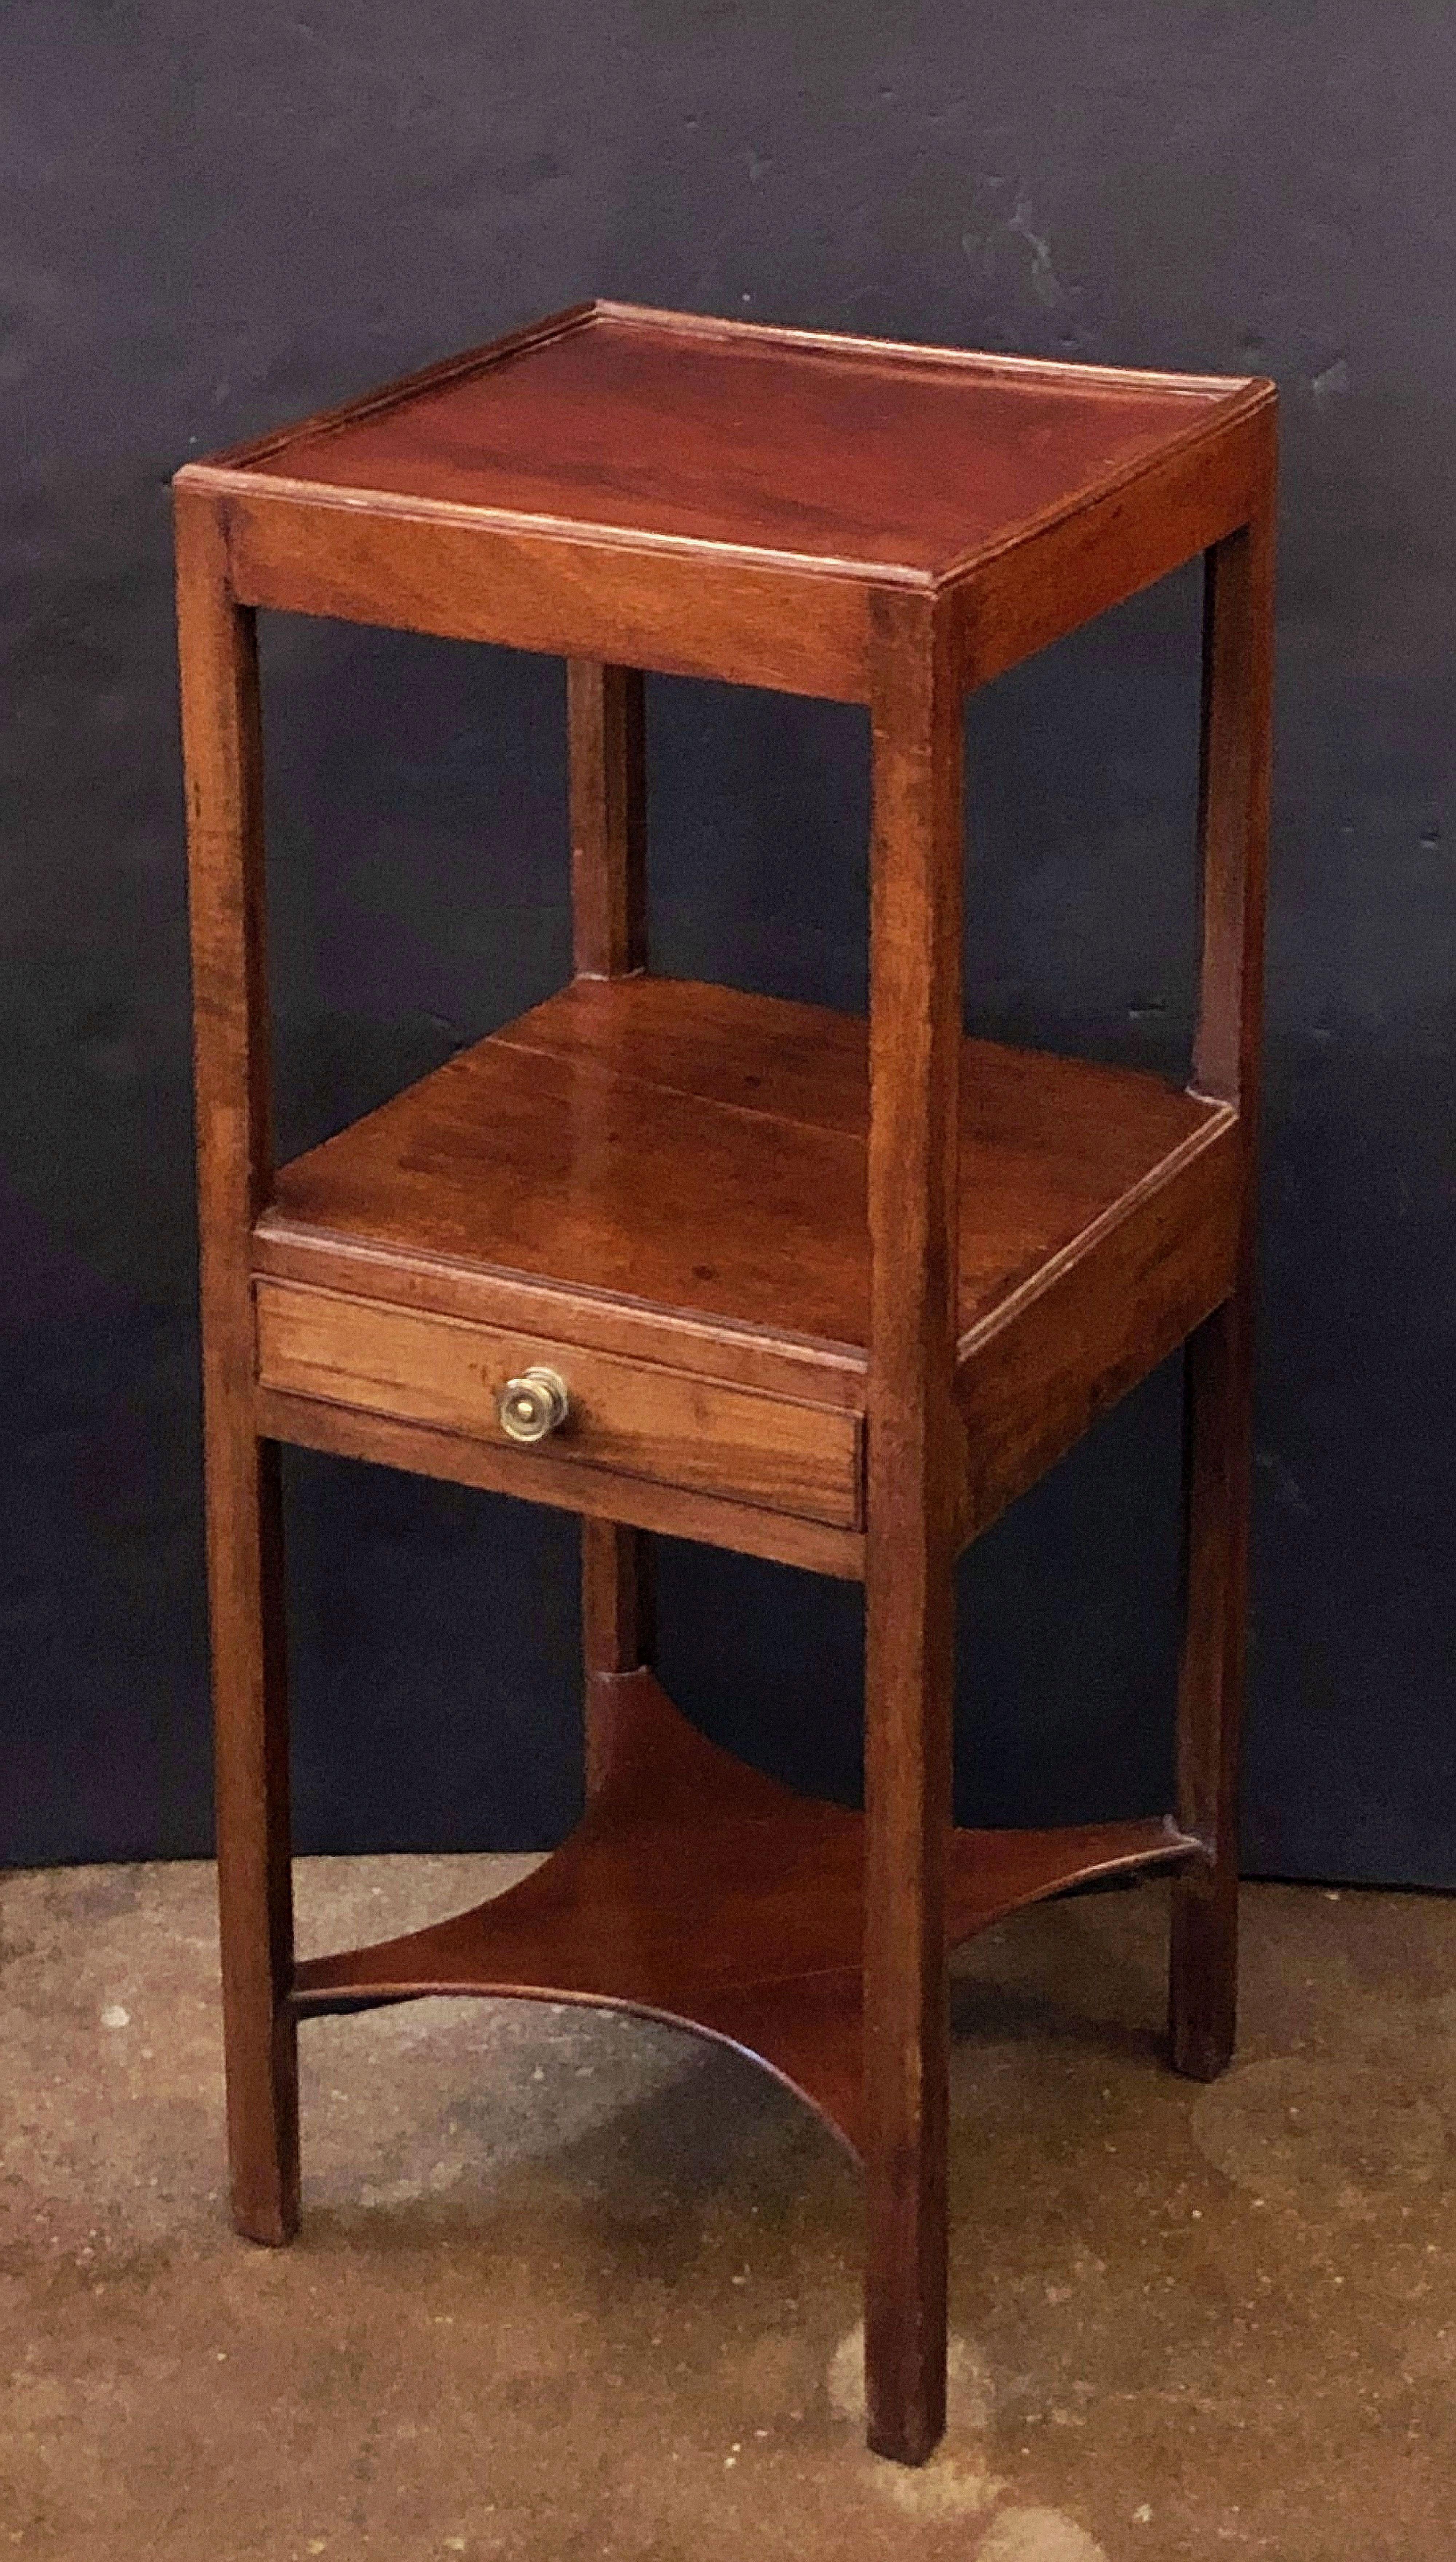 20th Century English Nightstand or Bedside Table of Mahogany with One Drawer